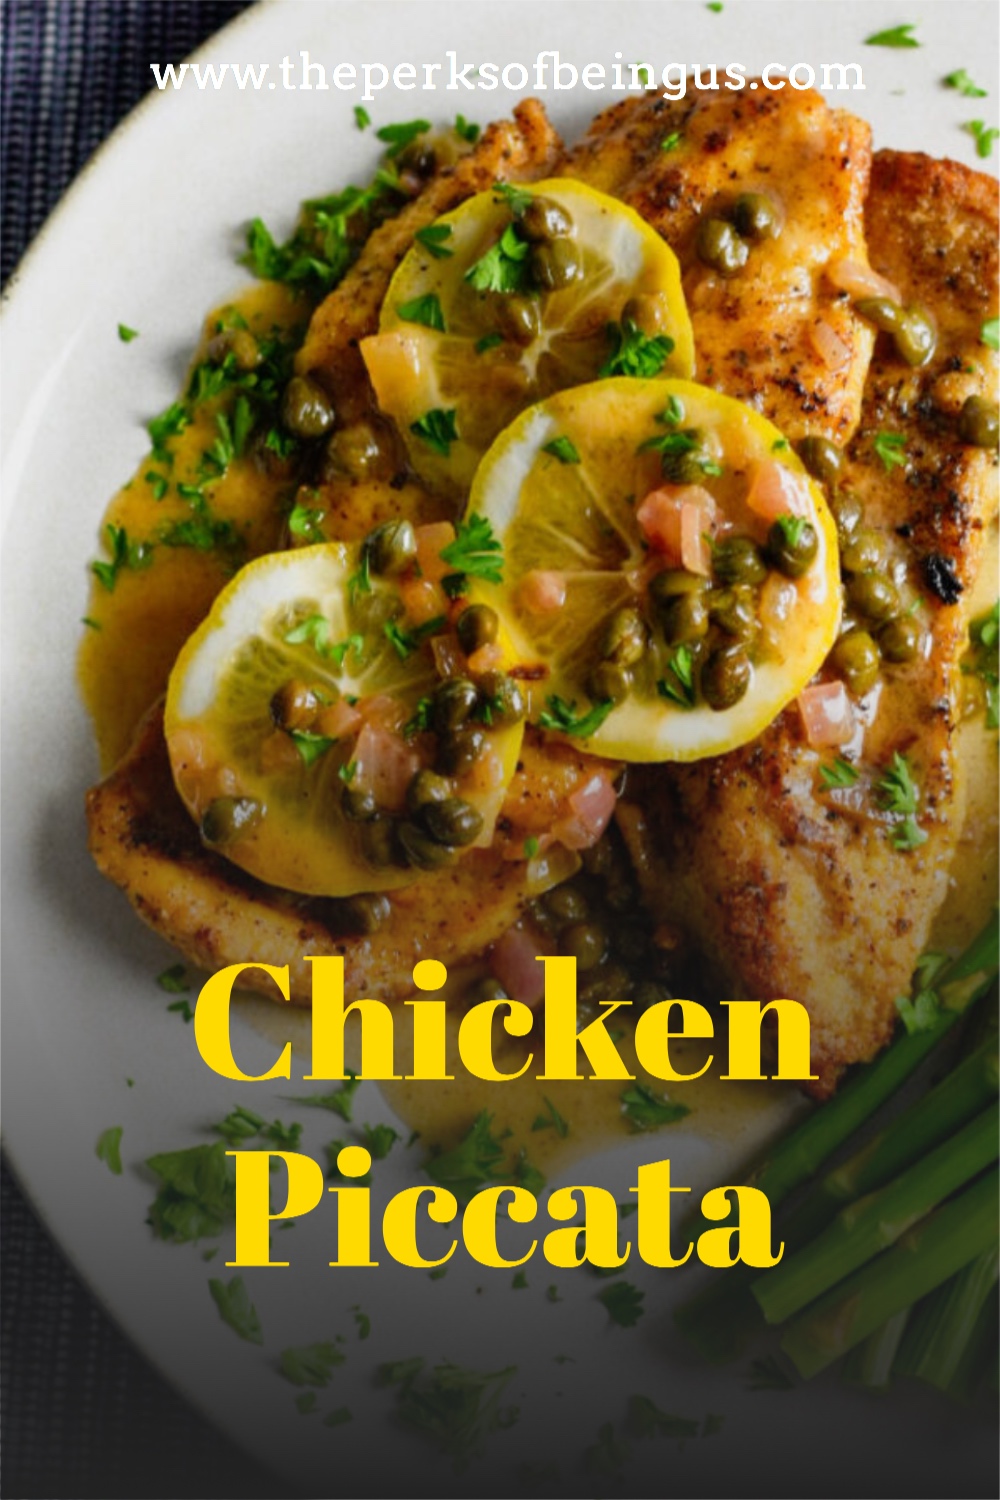 Chicken Piccata - The Perks of Being Us Chicken Piccata